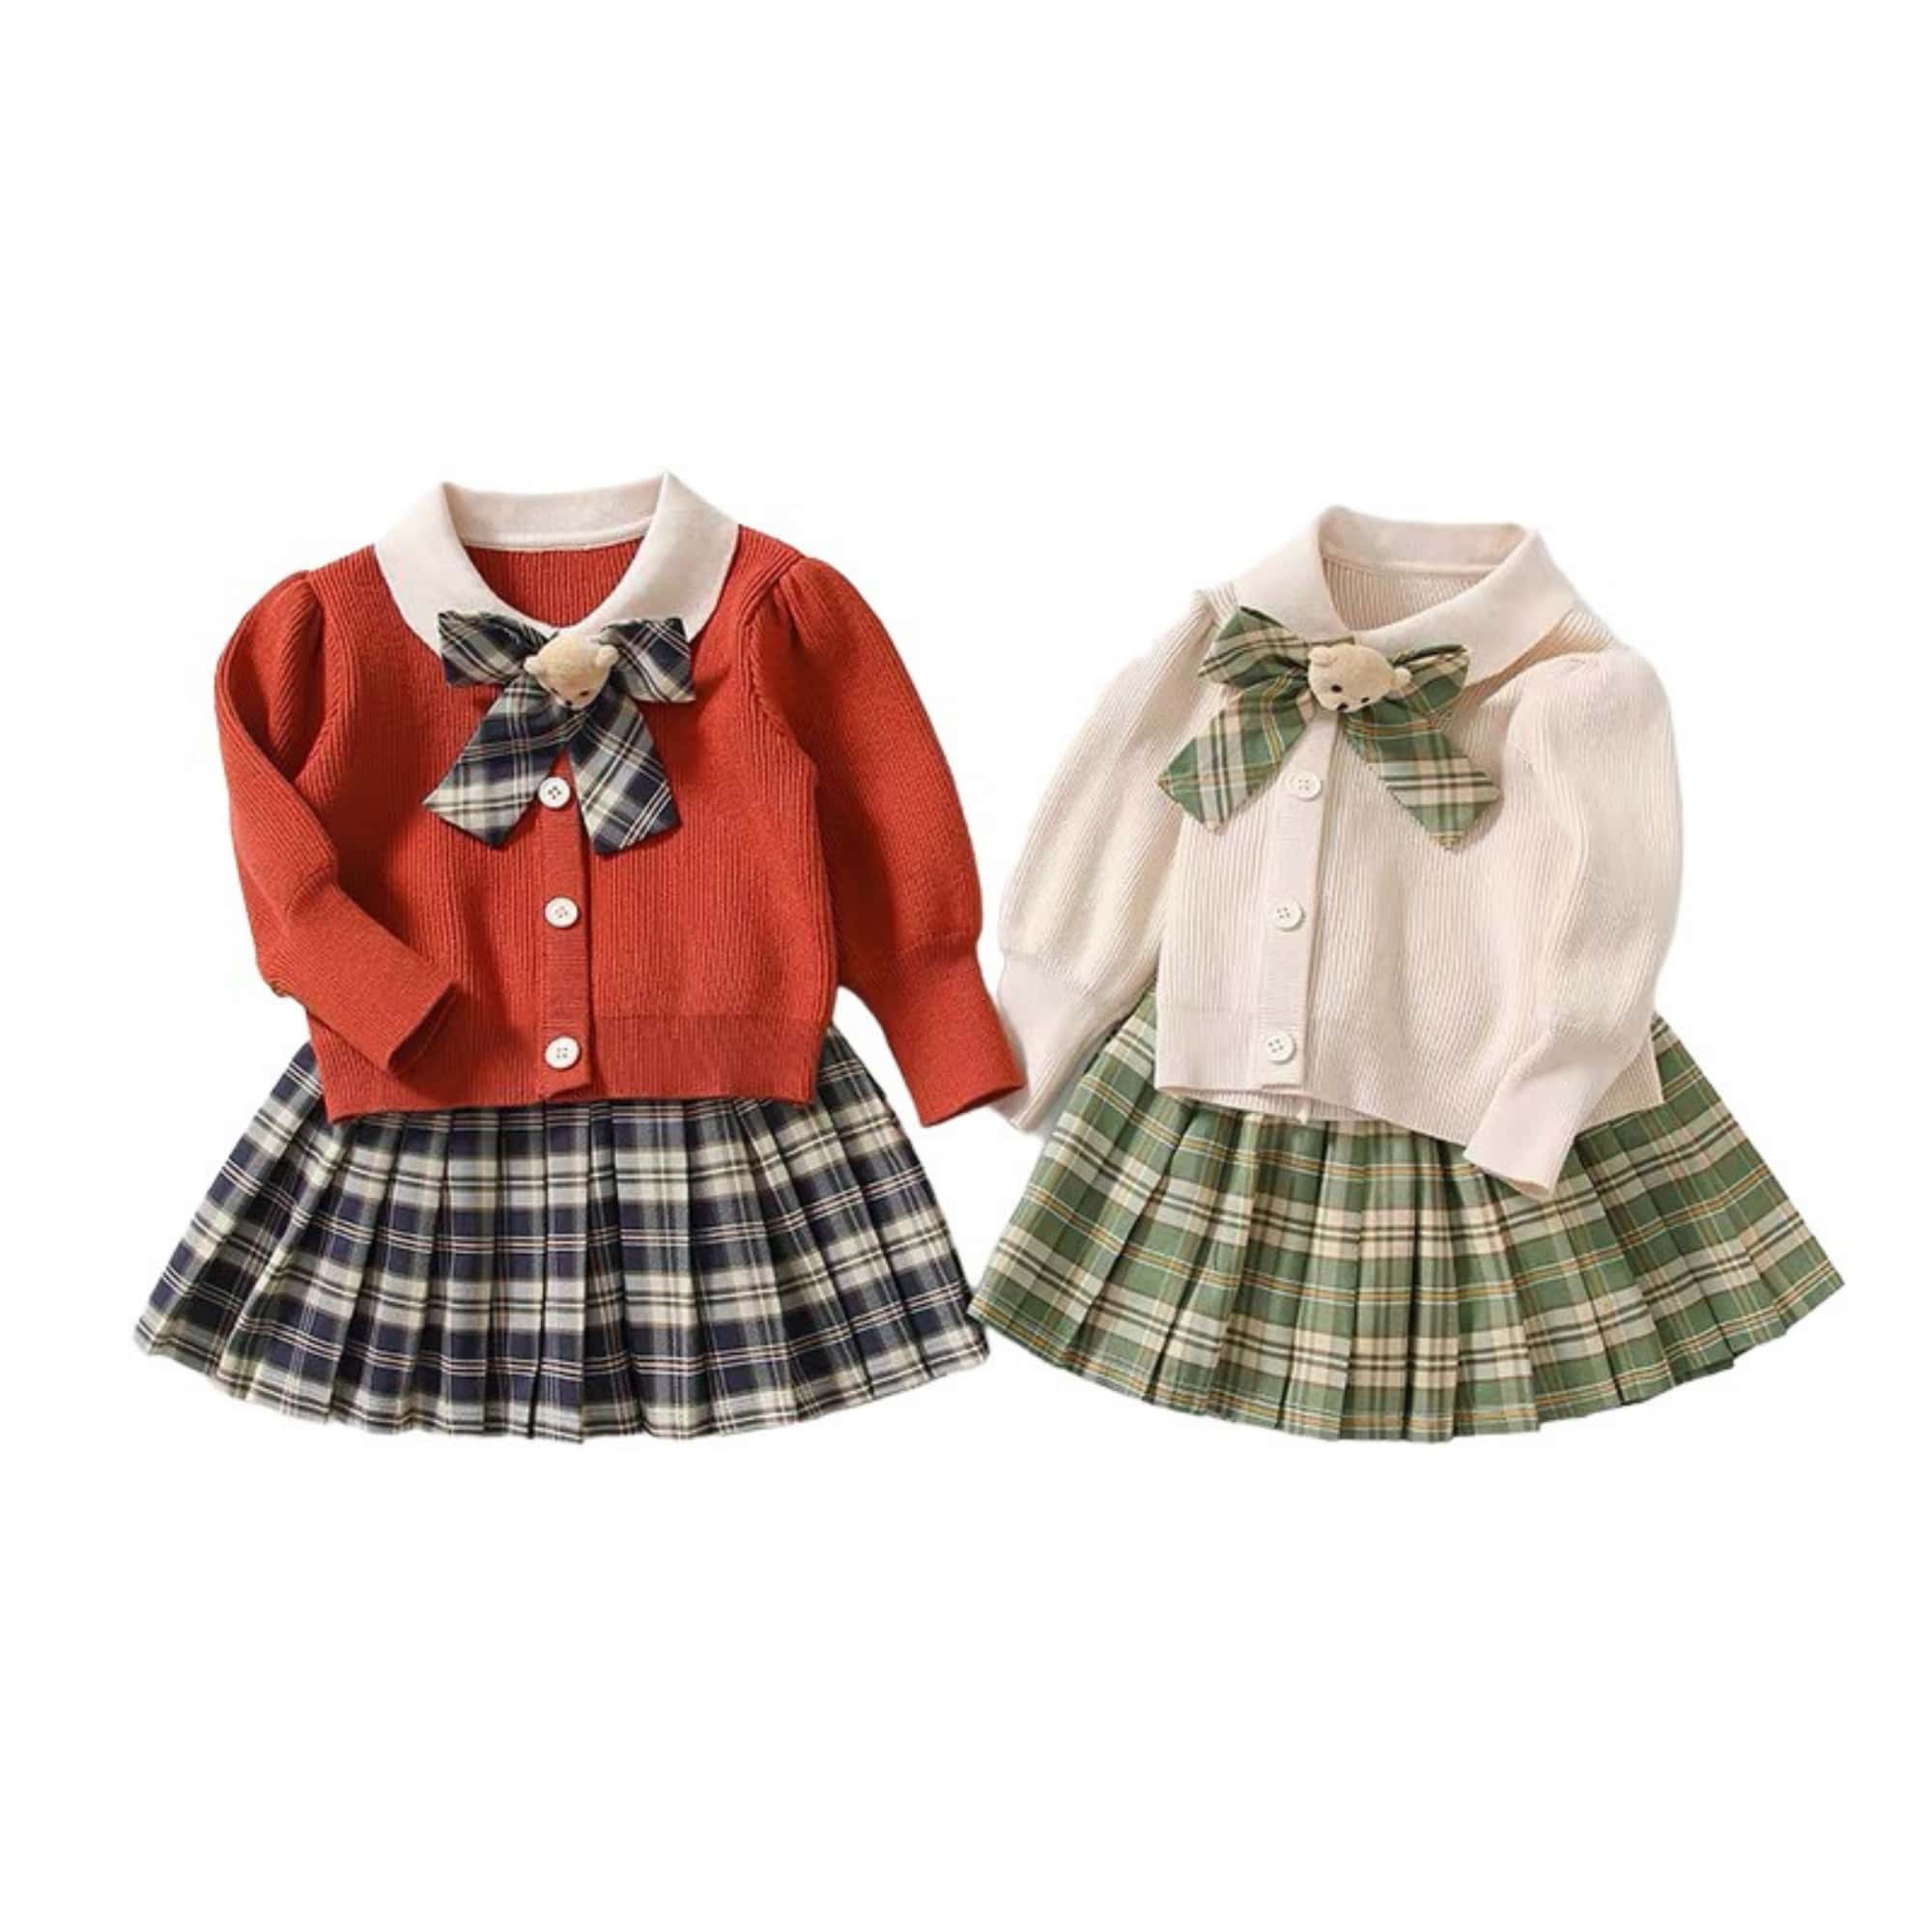 Wholesale Kids Clothes Customized Service Natural Dresses New Arrival Each One In Opp Bag From Vietnam Manufacturer 1